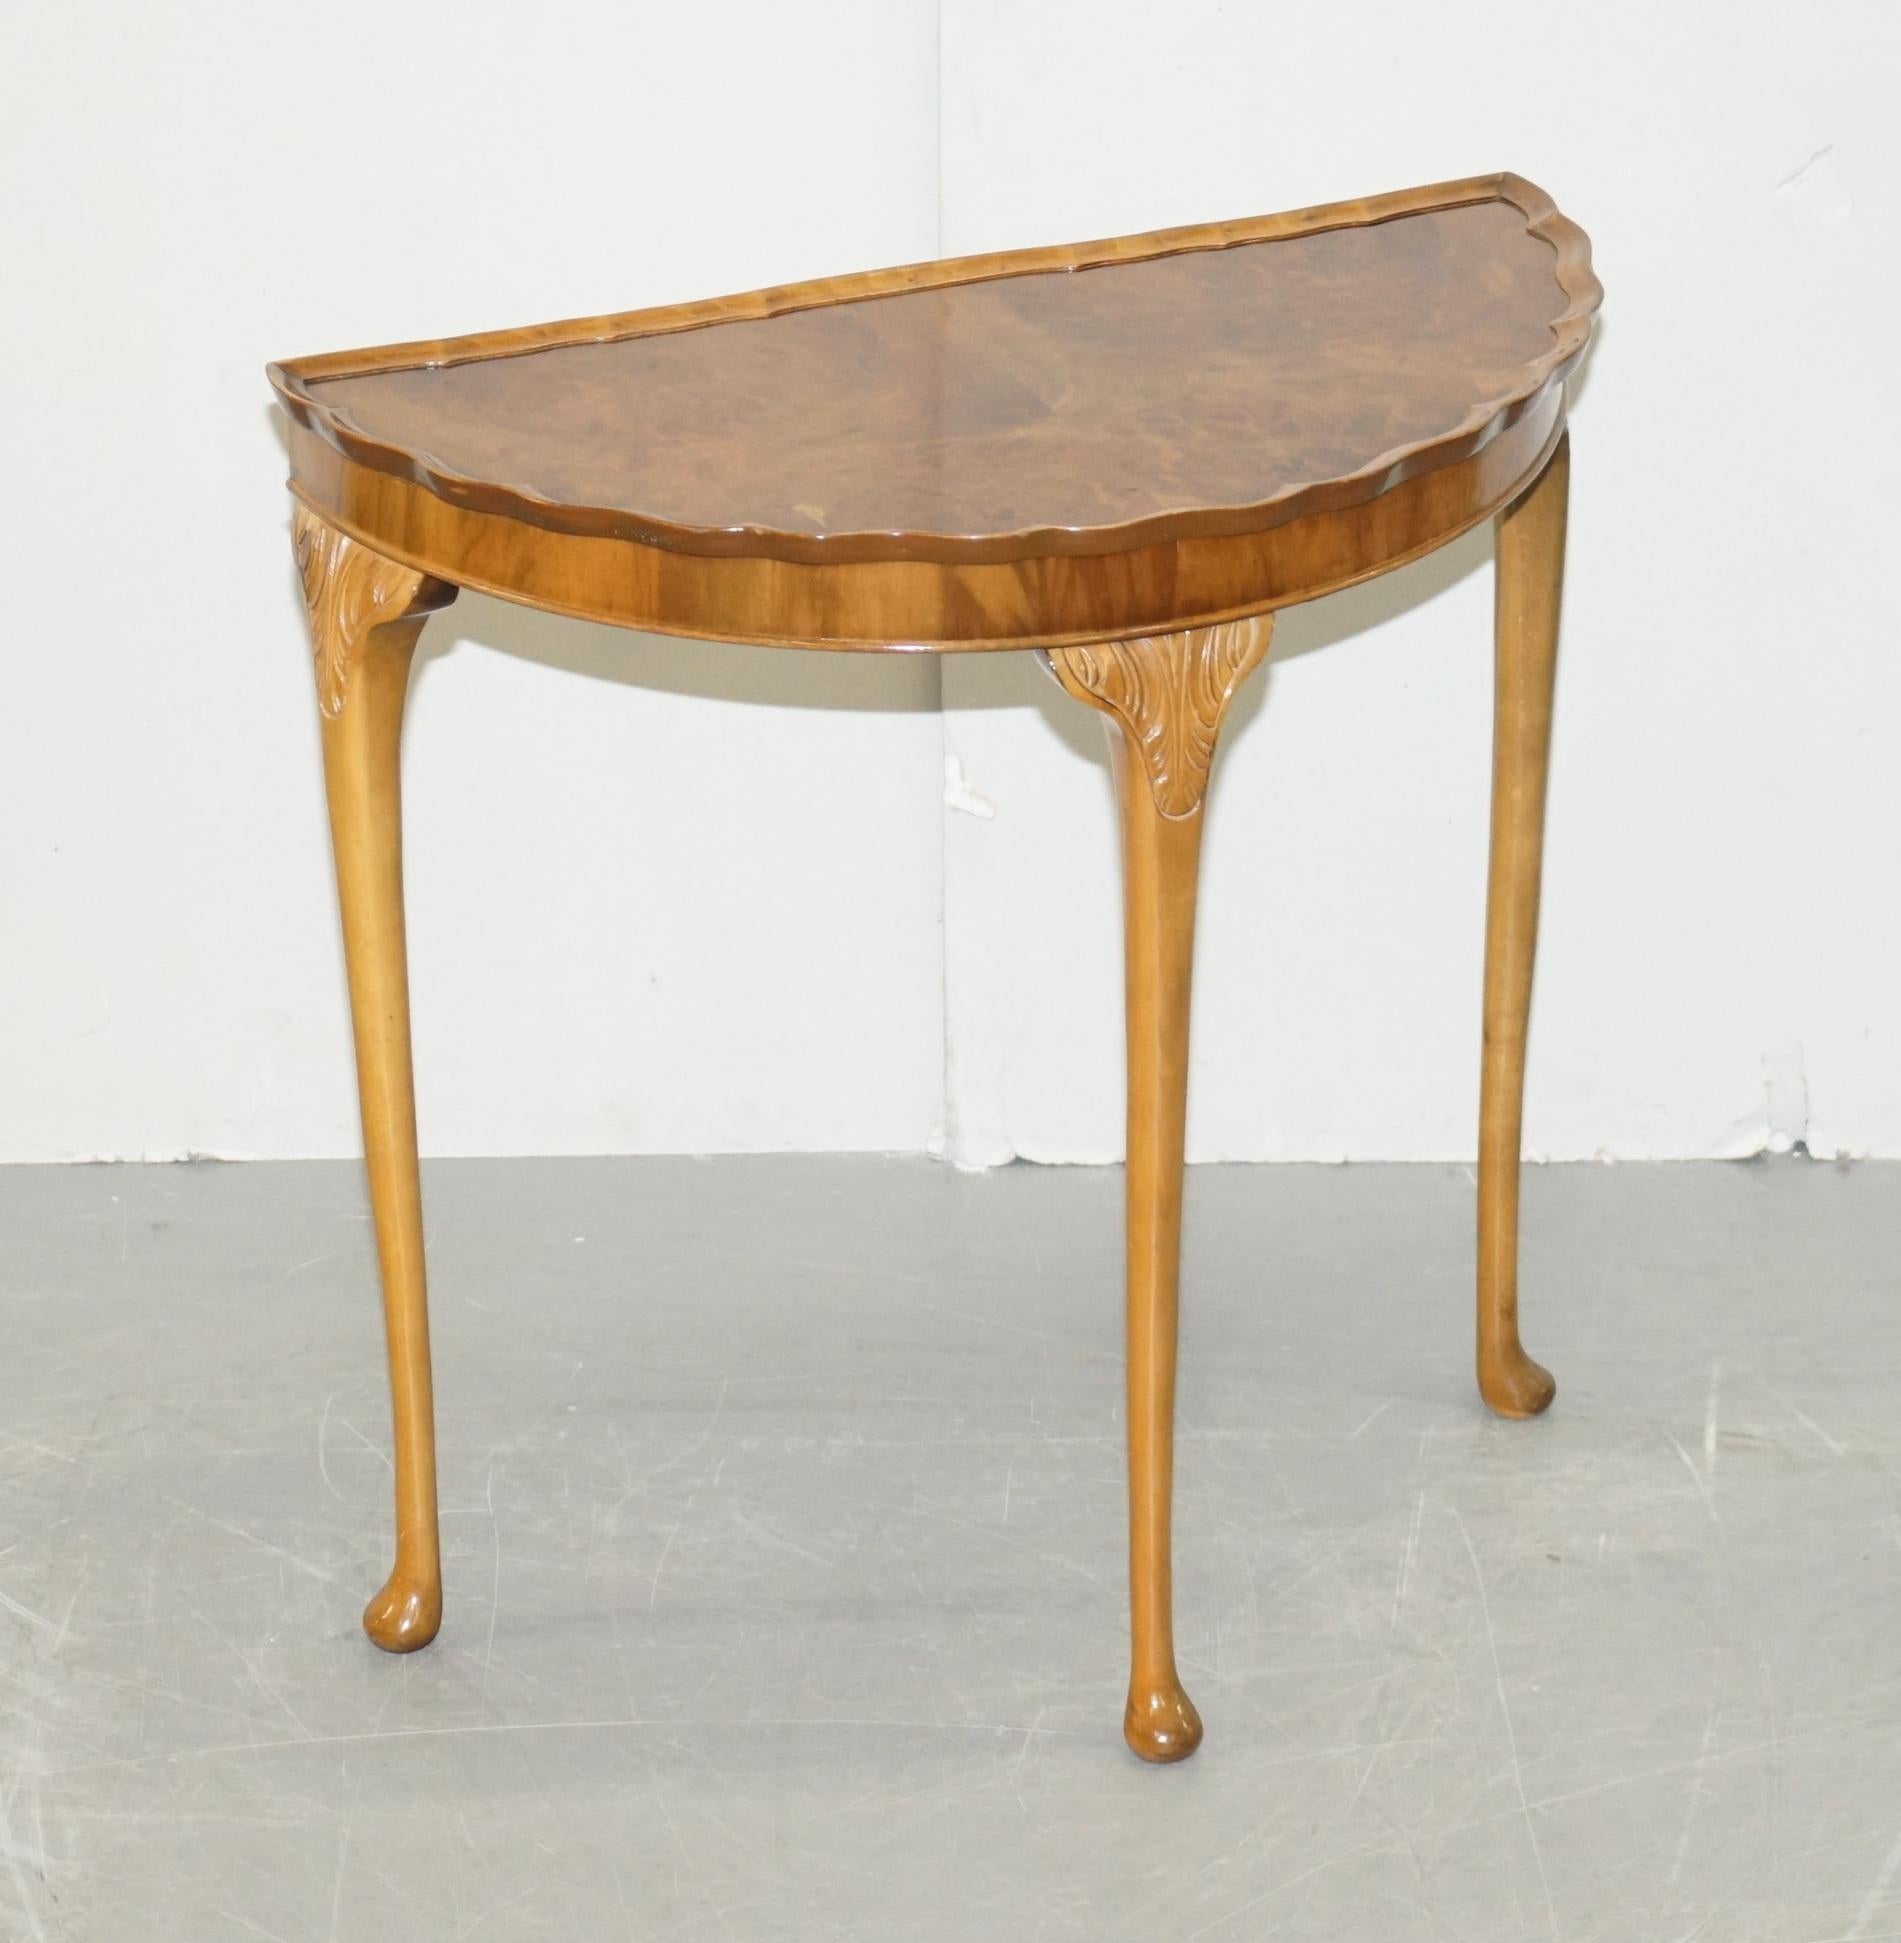 We are delighted to offer this lovely vintage Art Deco style burr walnut demi lune console side table

A very well made and good looking piece, its very decorative, the burr walnut has a rich warm patina, the scalloped edge is a detail you don’t